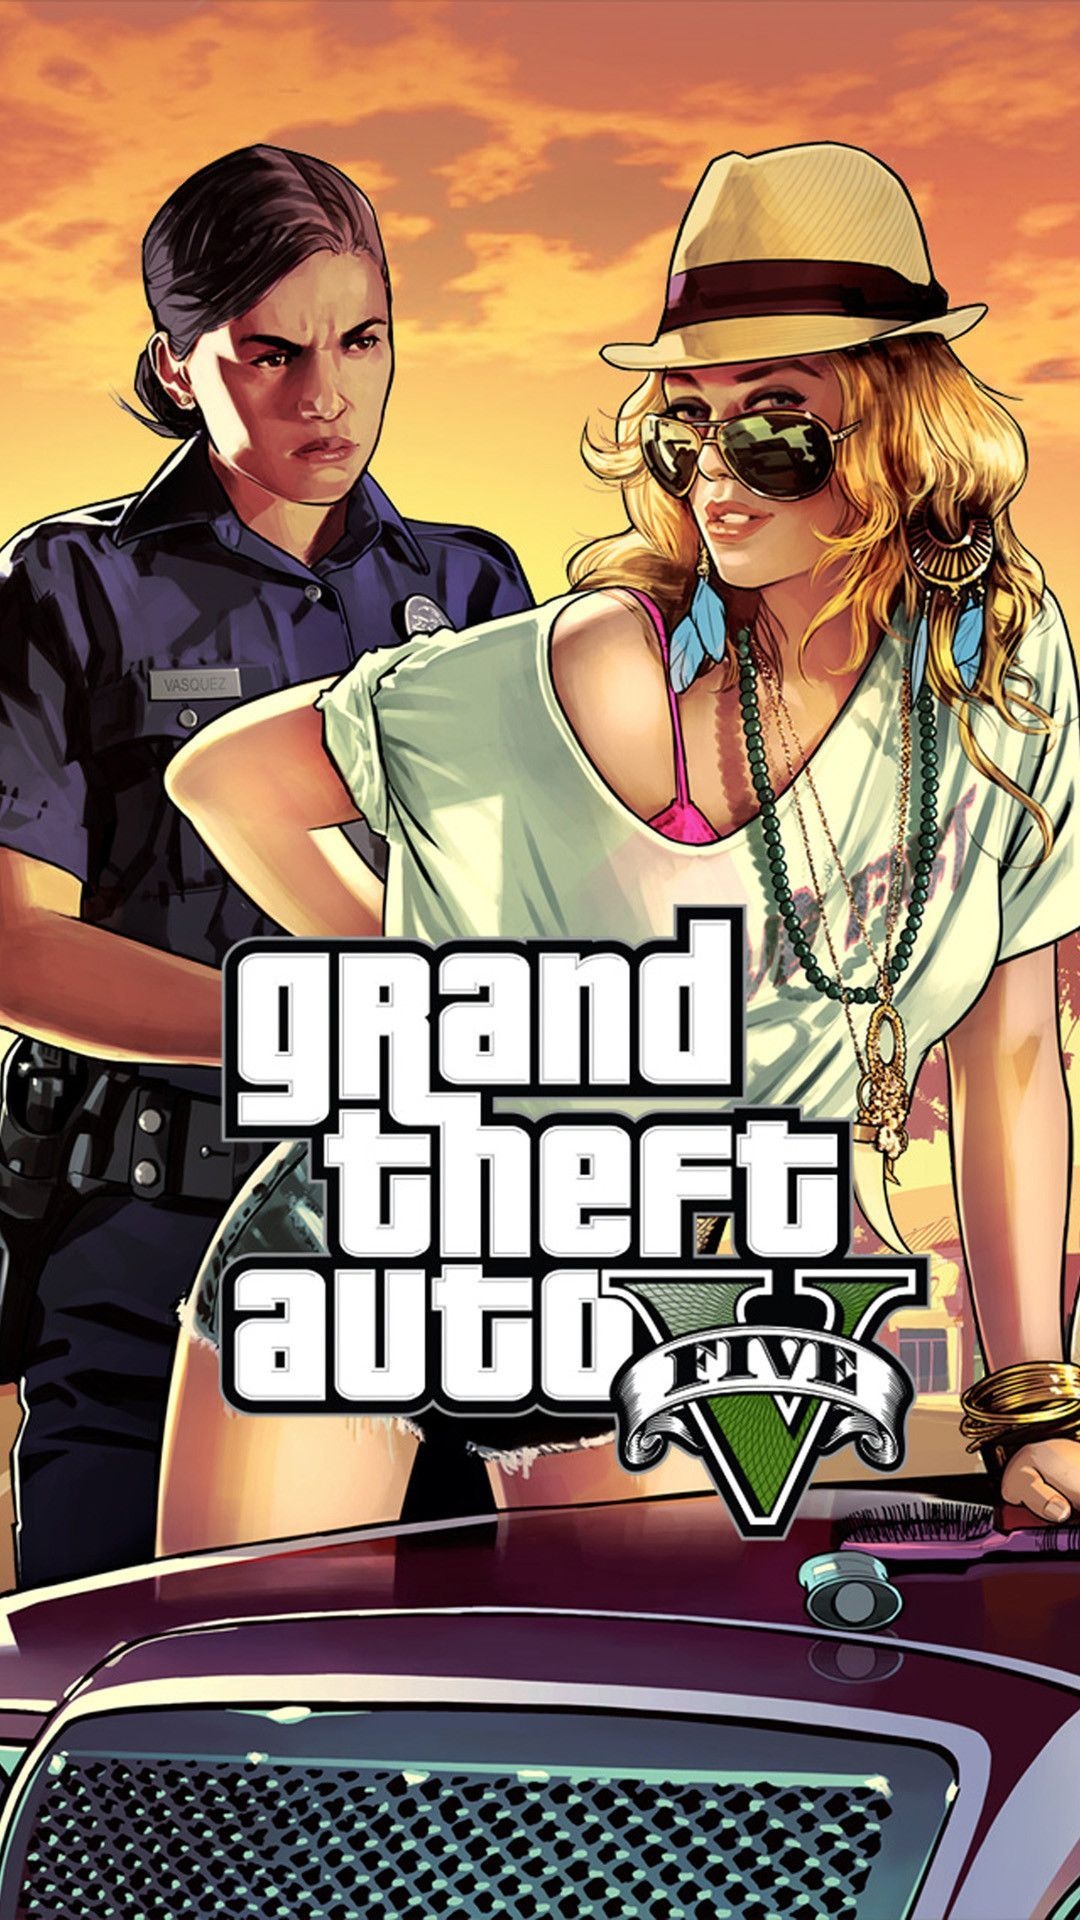 GTA wallpapers, Grand Theft Auto artwork, Gaming wallpapers, Action-packed gameplay, 1080x1920 Full HD Phone